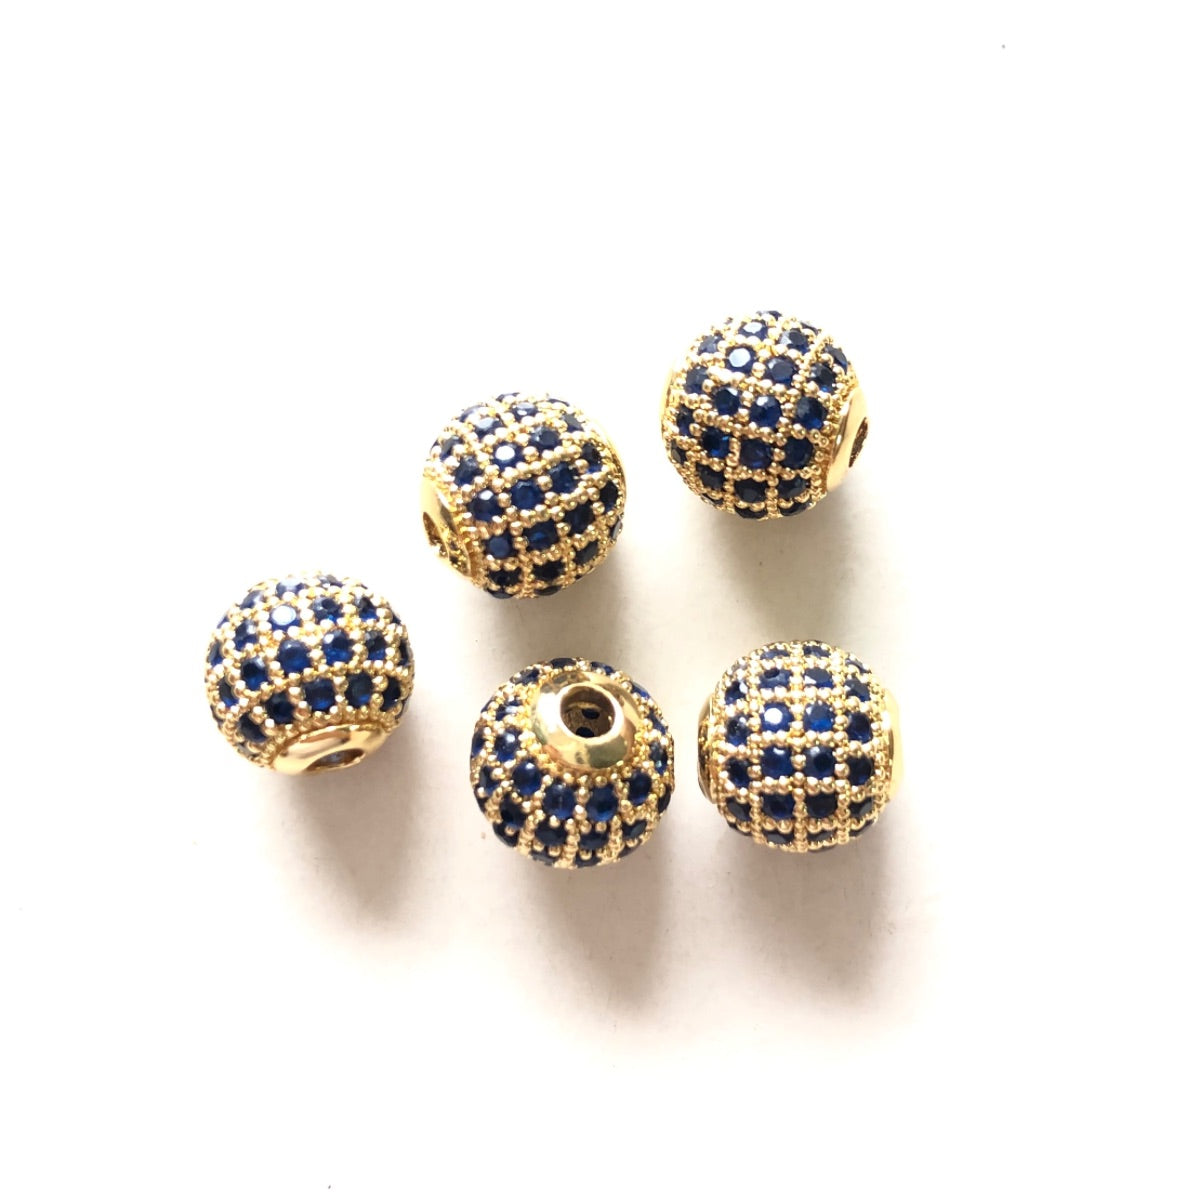 10pcs/lot 6mm, 8mm Colorful CZ Paved Ball Spacers Gold Blue CZ Paved Spacers 6mm Beads 8mm Beads Ball Beads Colorful Zirconia New Spacers Arrivals Charms Beads Beyond